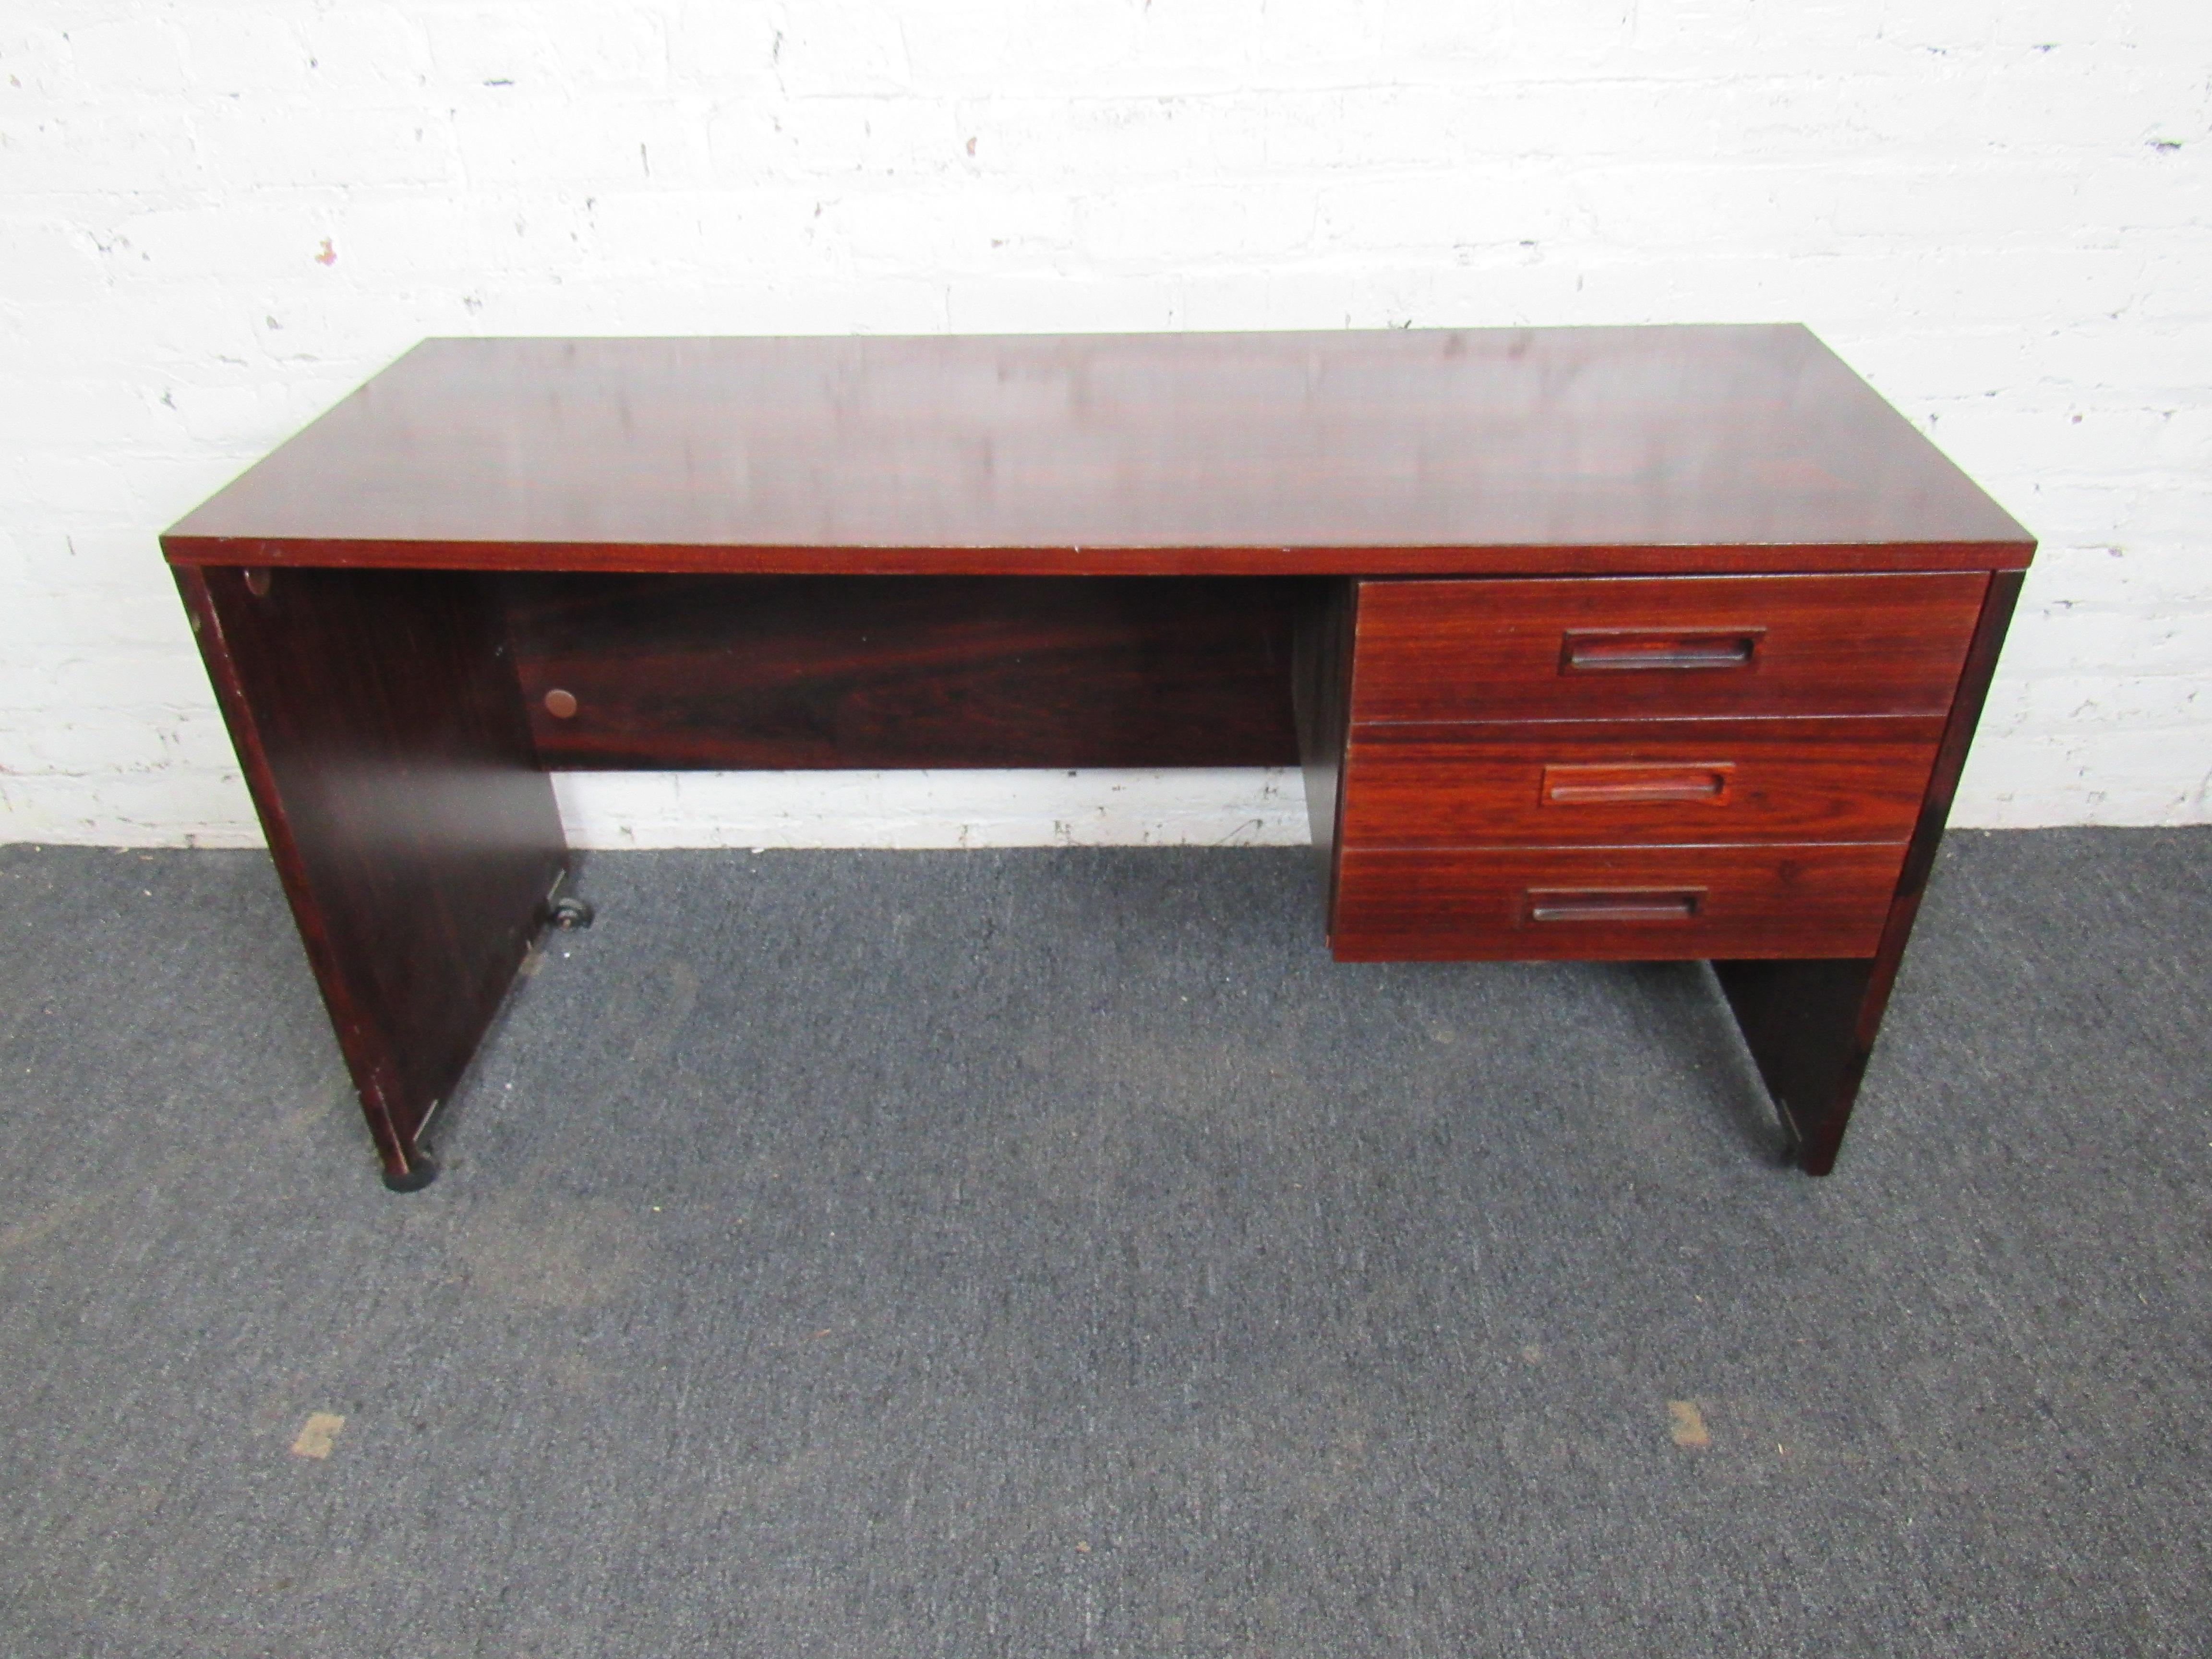 Vintage writing desk on rolling wheels, in an incredible rich rosewood color. This compact desk is functional and stylish, with a minimal design and three drawers for organization. Please confirm item location with seller (NY/NJ).